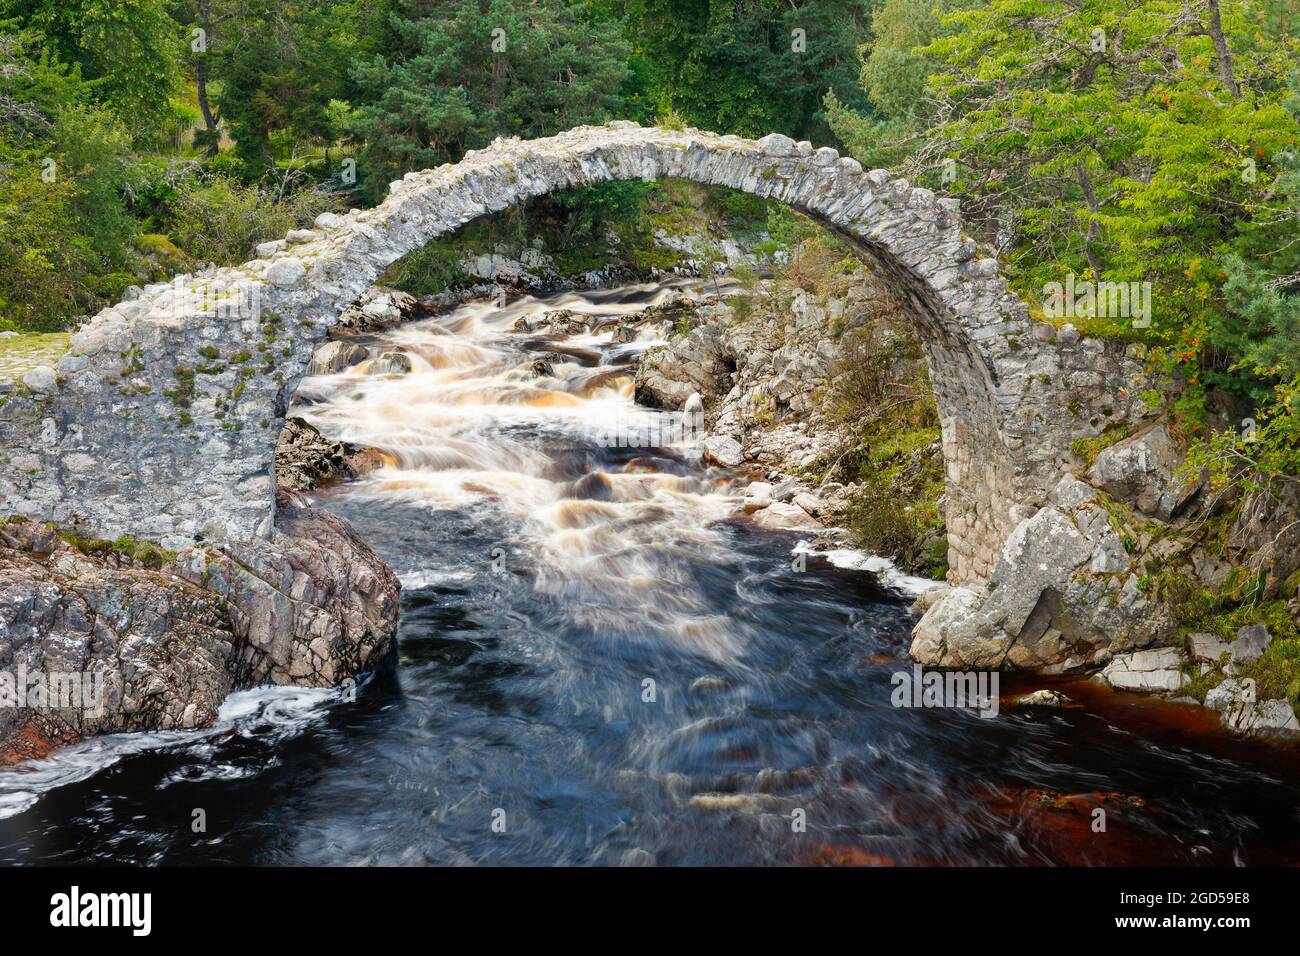 geography / travel, Great Britain, Scotland, Carrbridge with Dulnain river, Scotland, NO-EXCLUSIVE-USE FOR FOLDING-CARD-GREETING-CARD-POSTCARD-USE Stock Photo